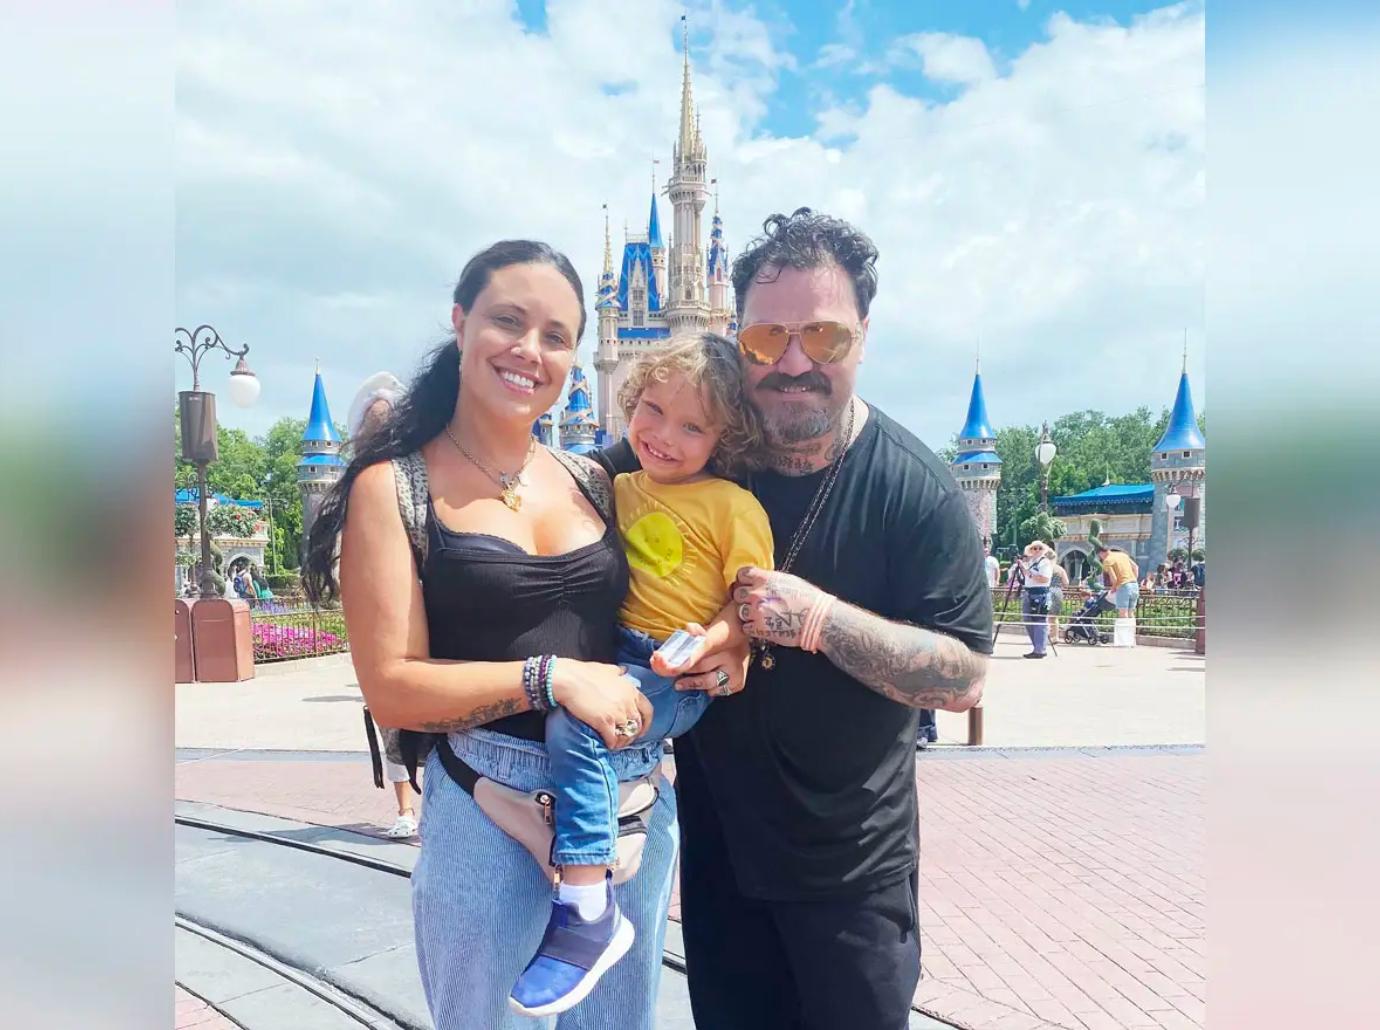 Bam Margera Cut Off From Contact With Son Phoenix After Arrest image